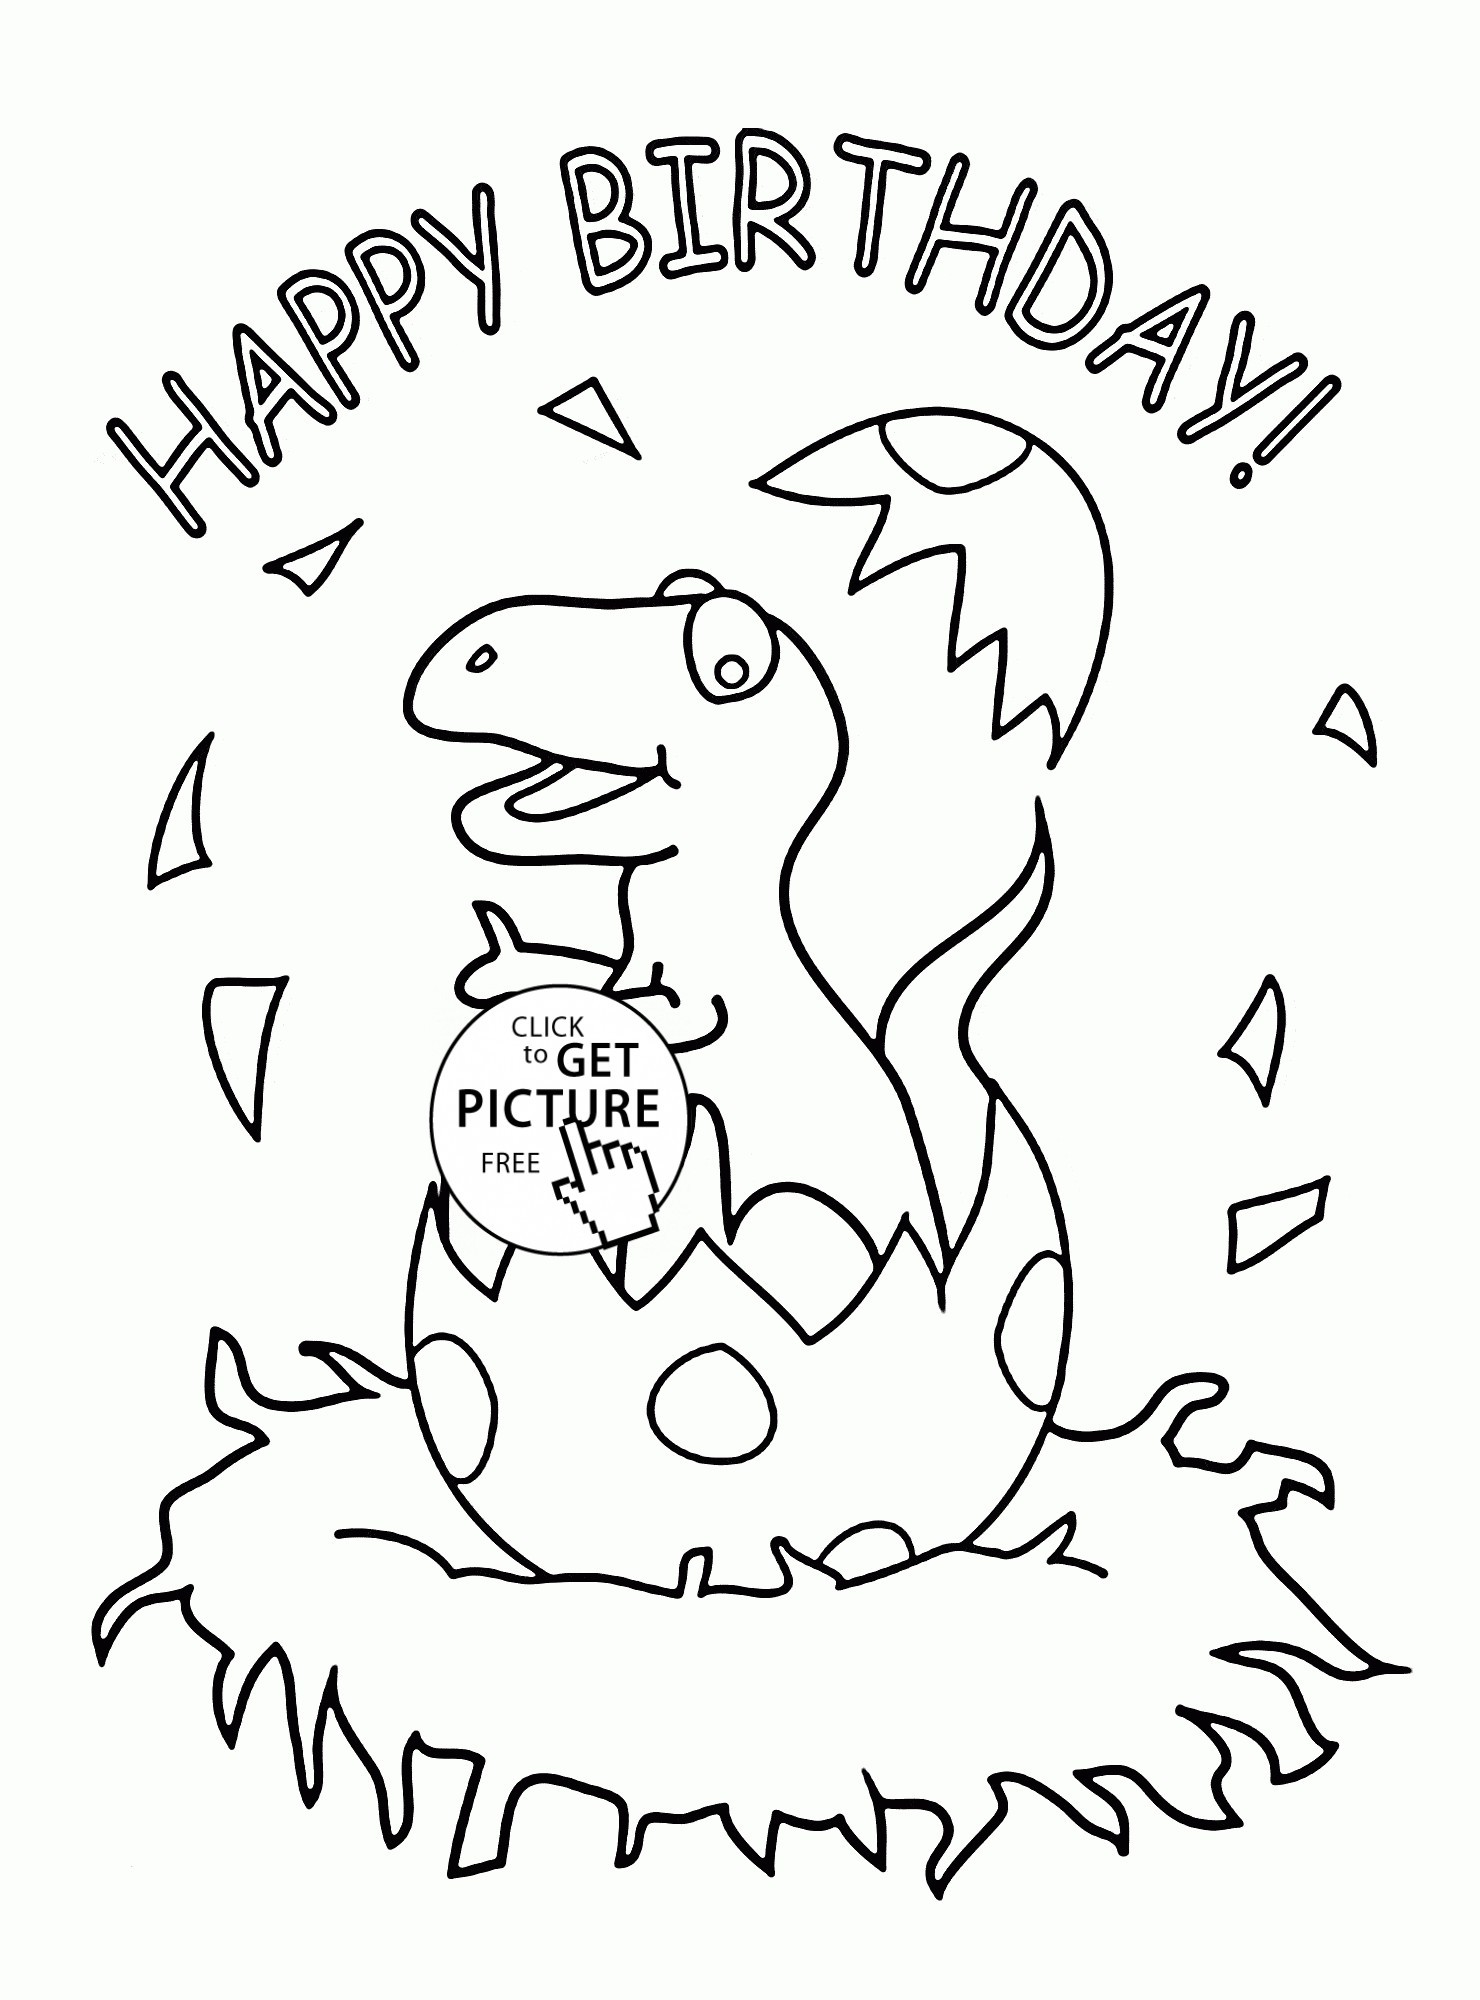 Little Dinosaur And Happy Birthday Coloring Page For Kids Holiday Adorable